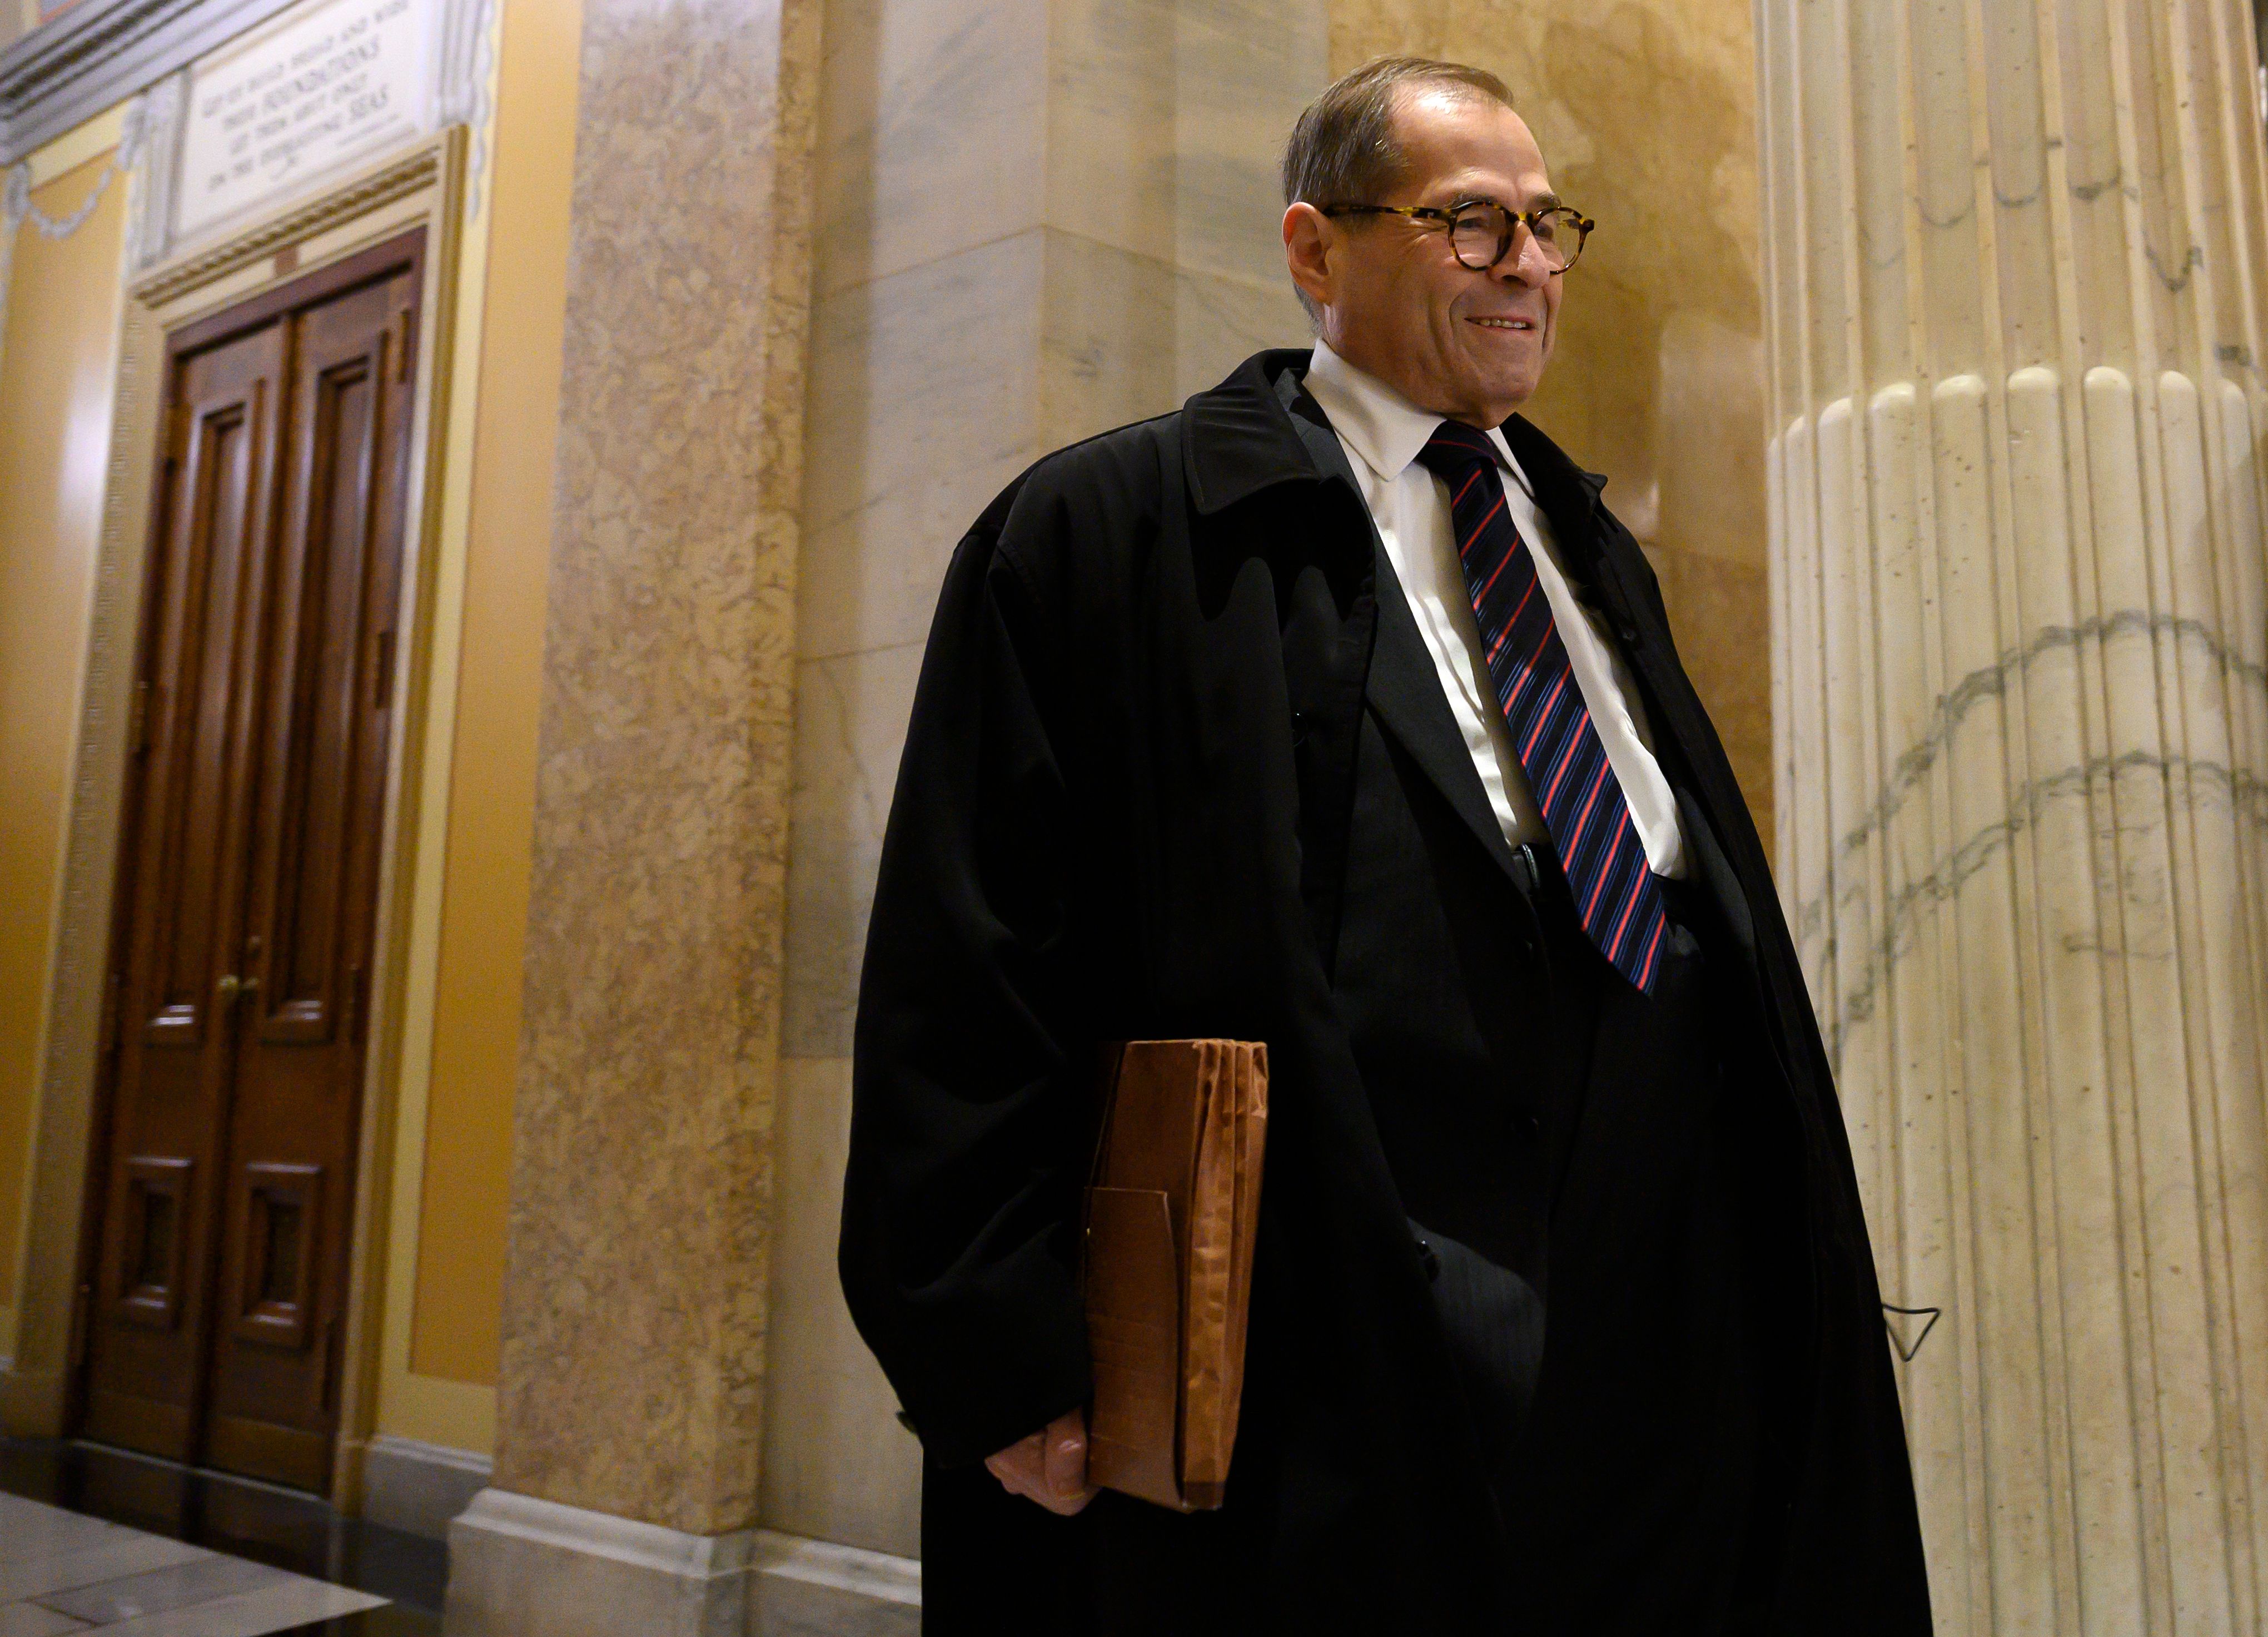 House Judiciary Committee chairman Jerrold Nadler (D-NY) arrives on Capitol Hill on October 22, 2019. (Andrew Caballero-Reynolds/AFP/Getty Images)